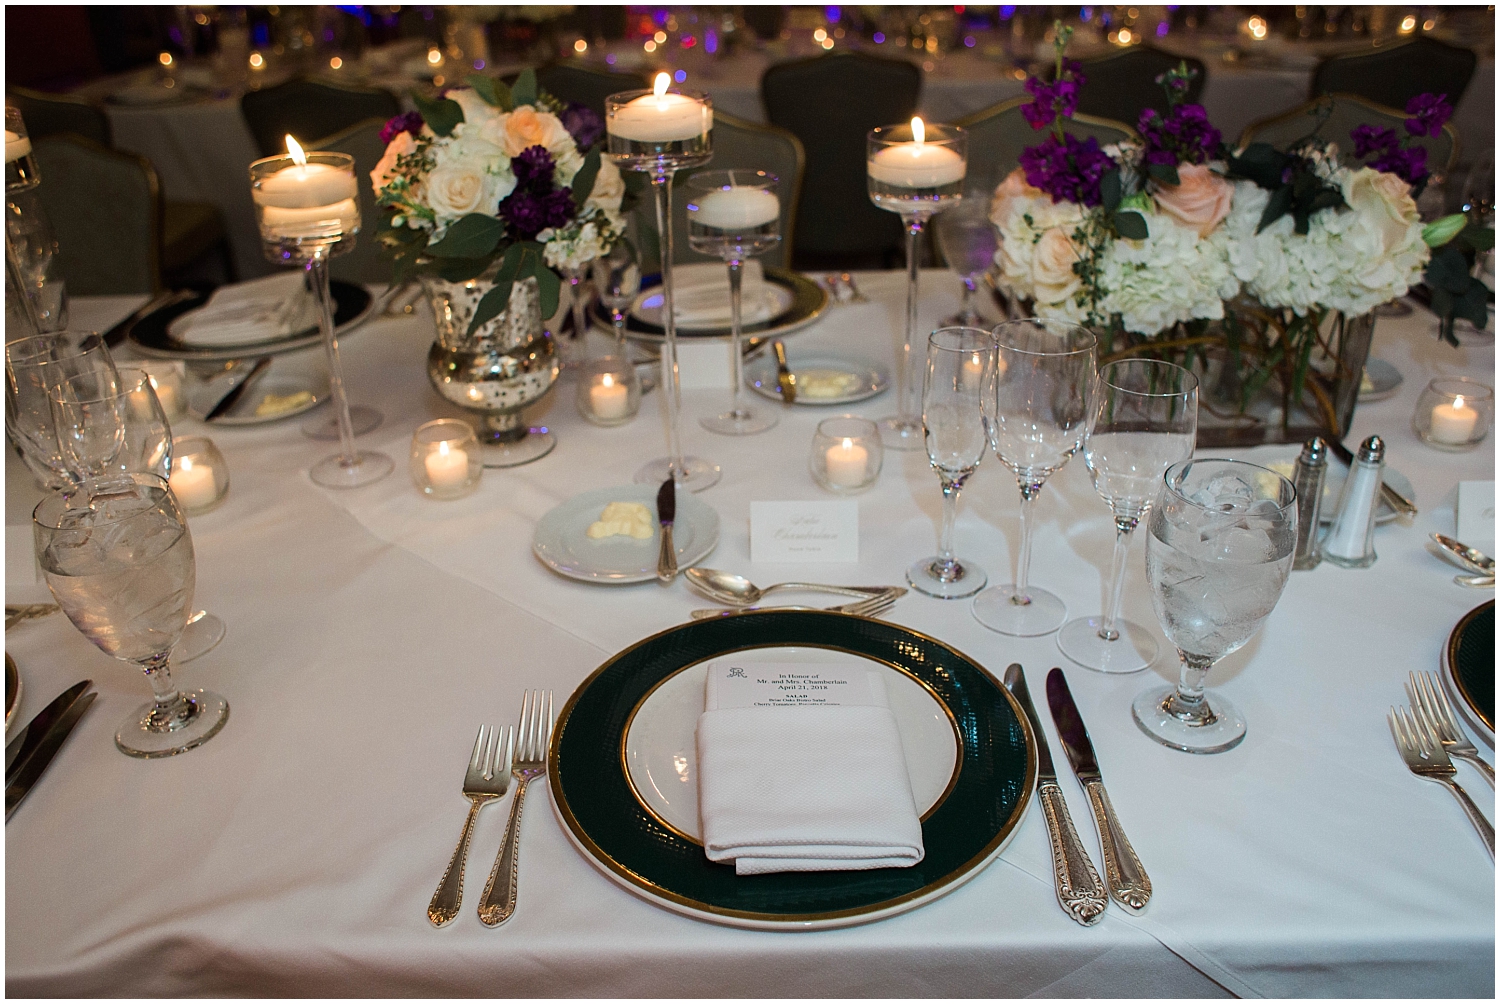  wedding reception table setting with candles and floral decor 